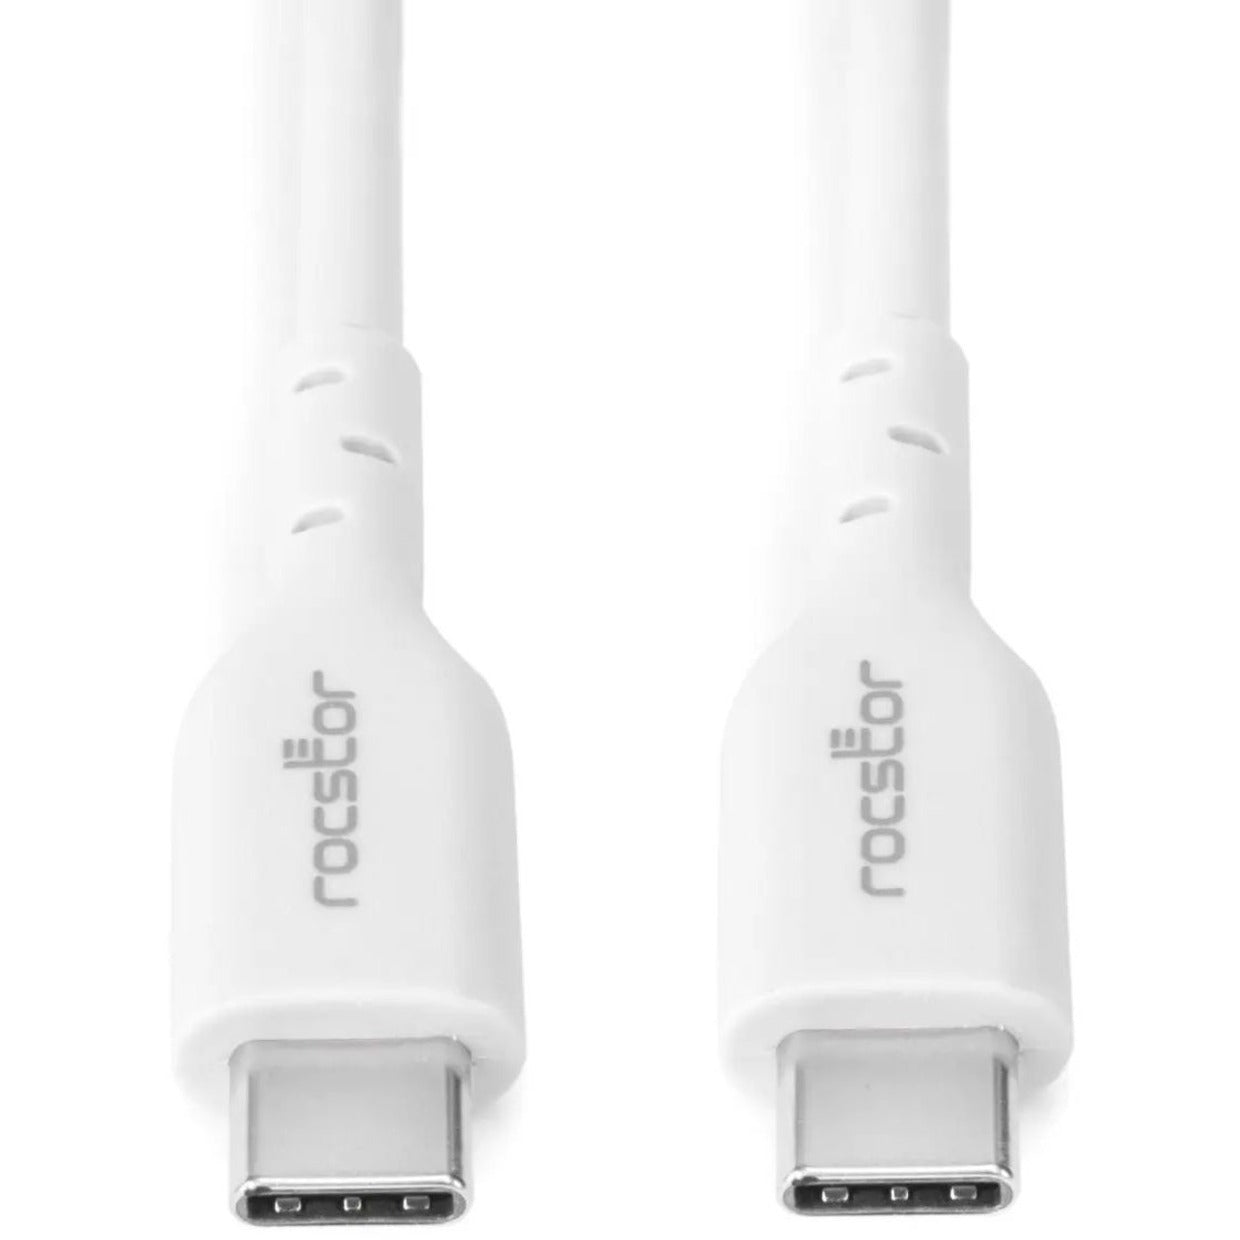 Rocstor Y10C499-W1 USB-C Charging Cable Up to 240W Power Delivery - Fast Charging, Heavy Duty, EMI Protection